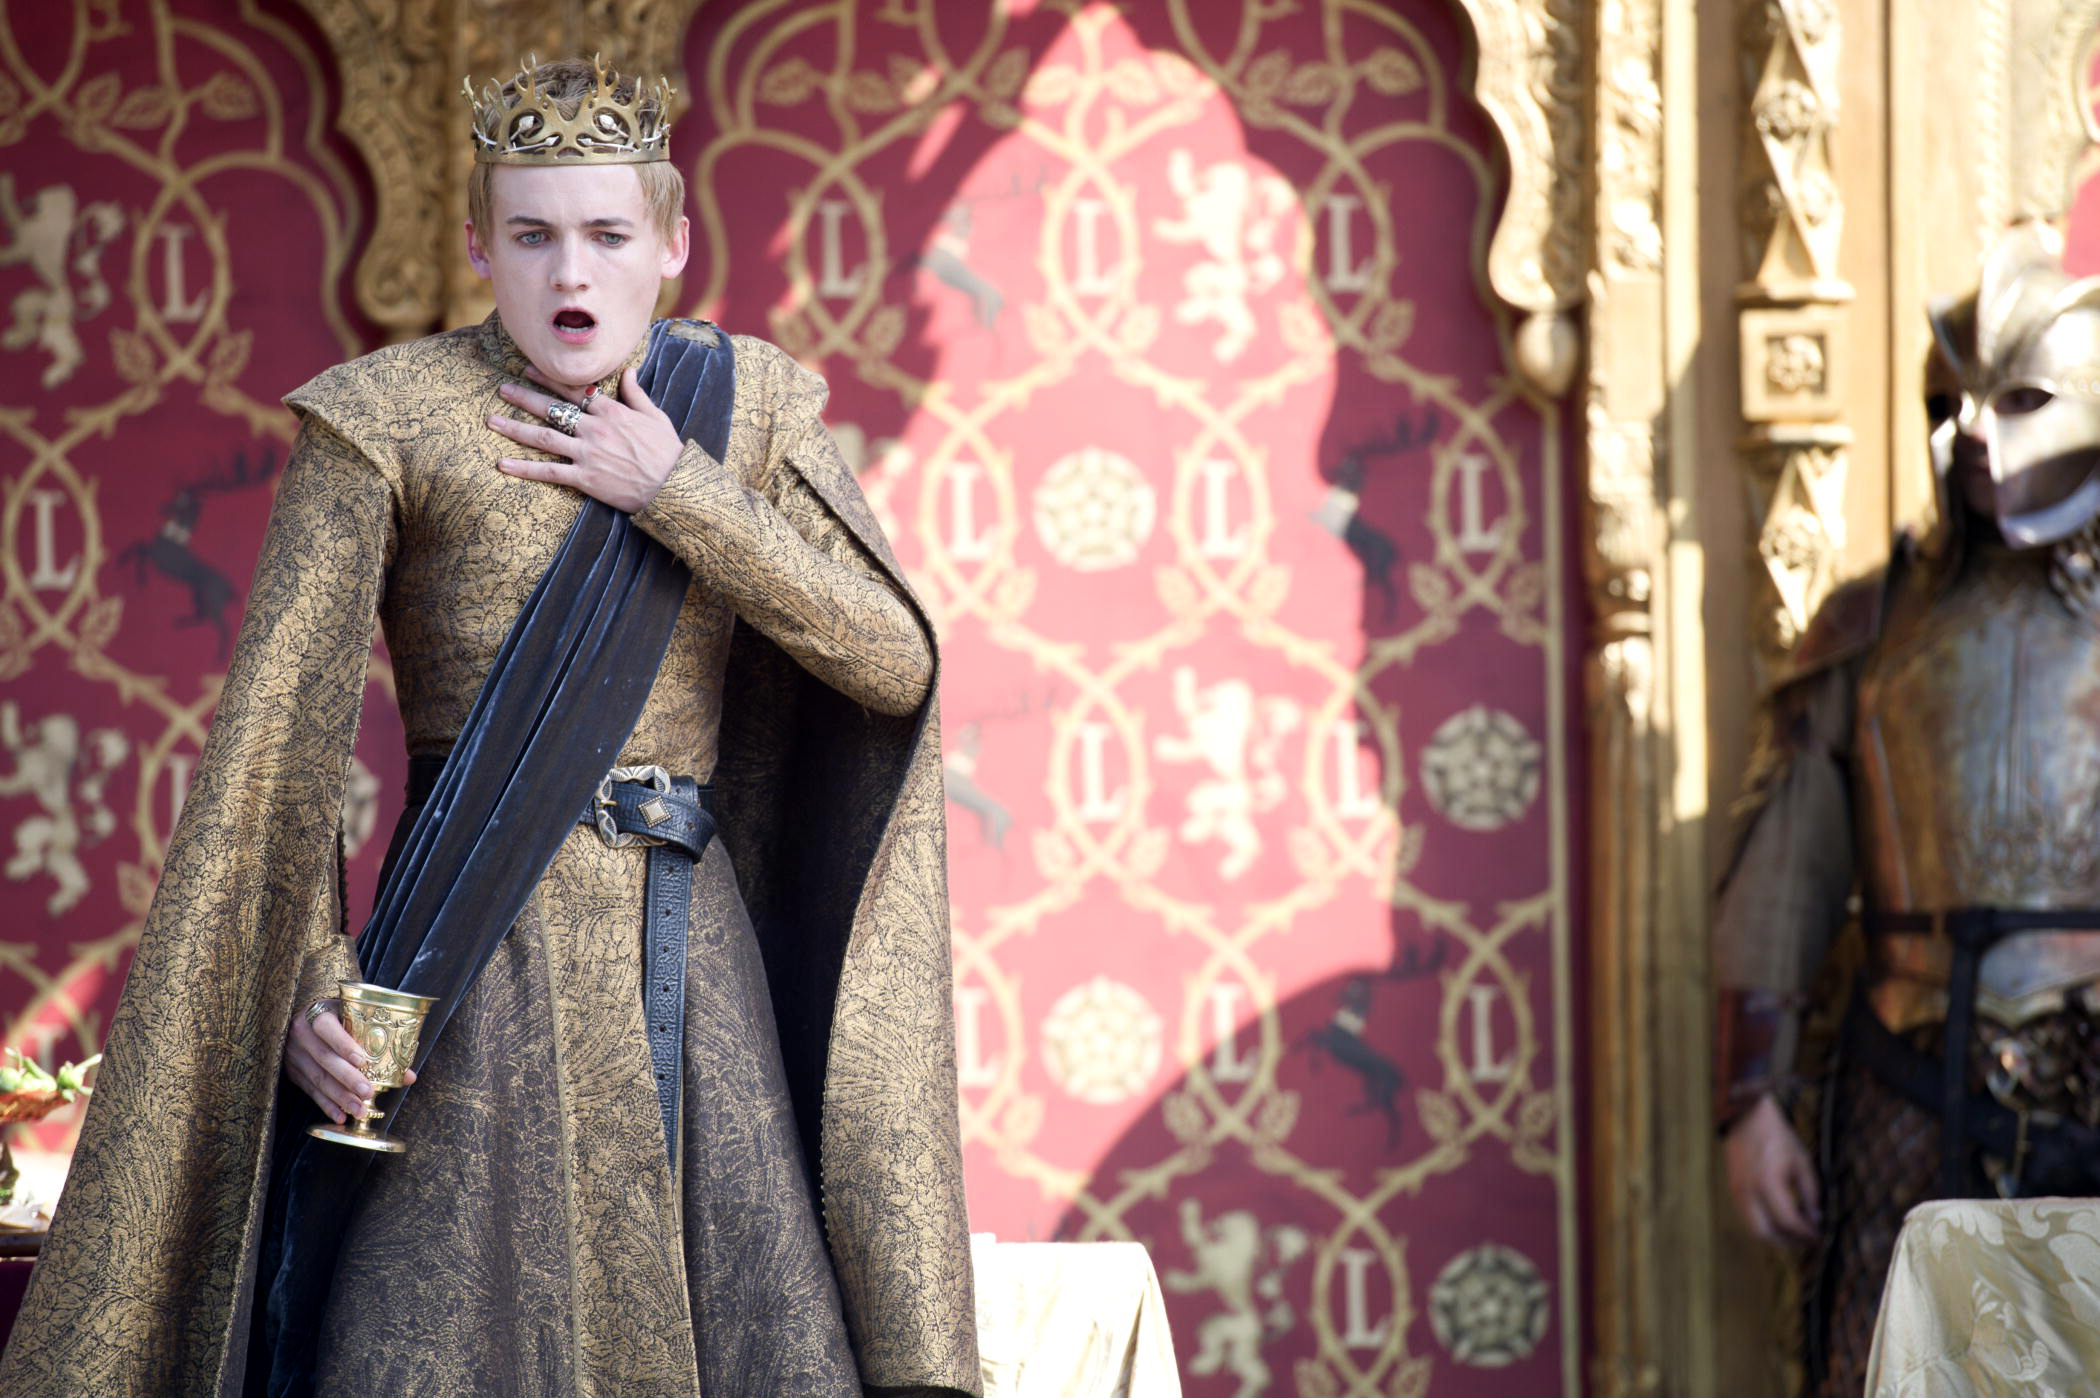 PHOTO: Jack Gleeson, as King Joffrey, in a scene from 'Game of Thrones.'